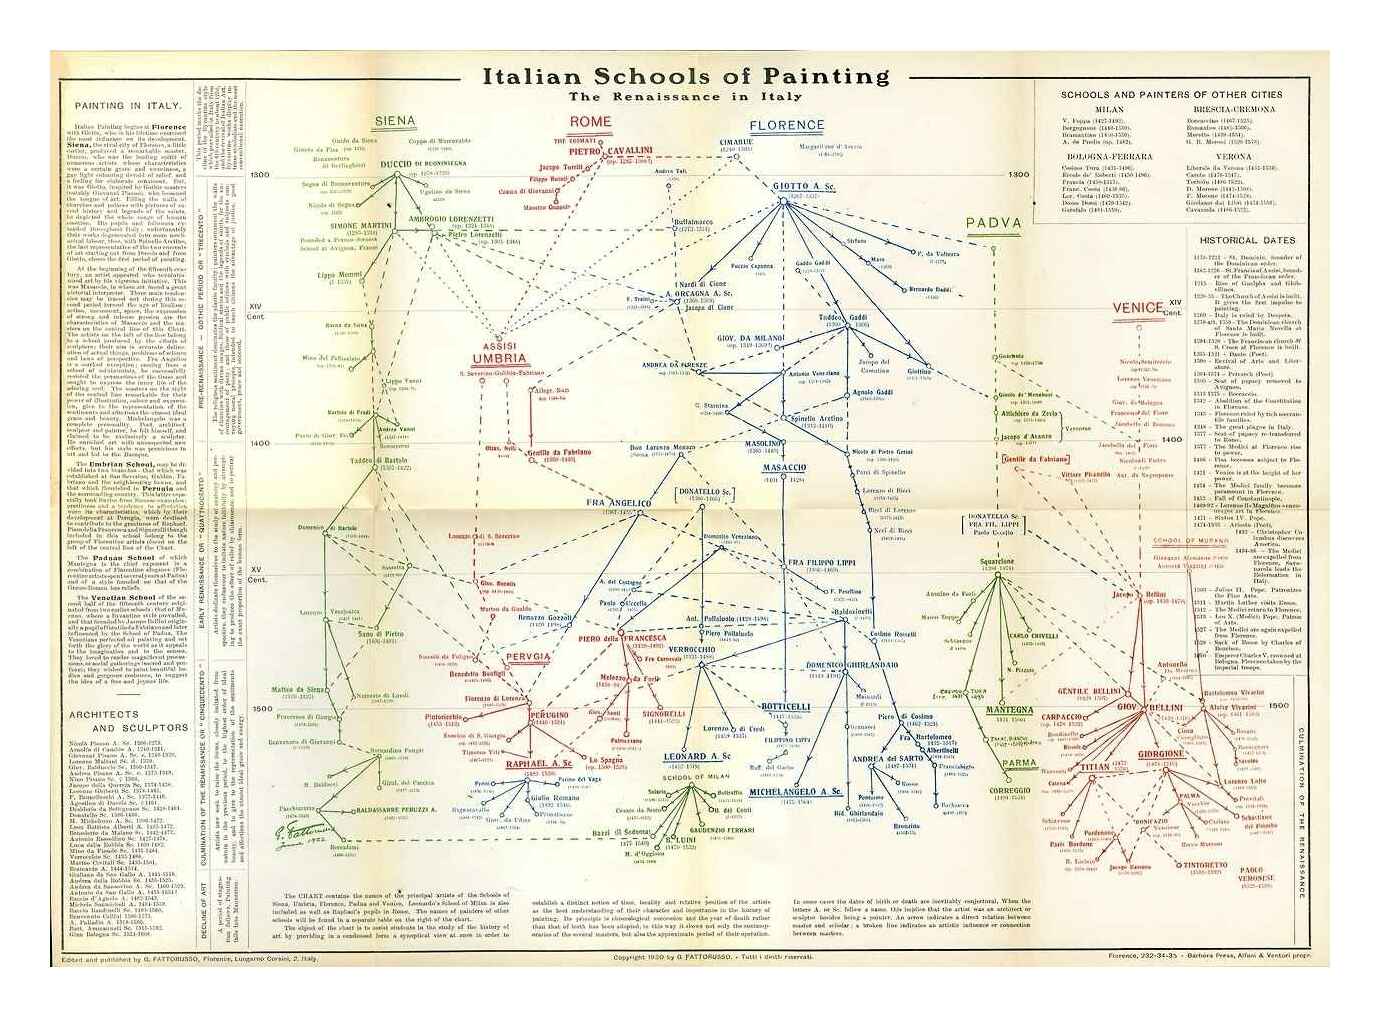 “Italian Schools of Painting: The Renaissance in Italy” phylogenetic timeline, printed in the brochure Italian Schools of Painting: History of Art Charts for the Uffizi-Pitti Gallery in 1930 (Museum of Modern Art scan)